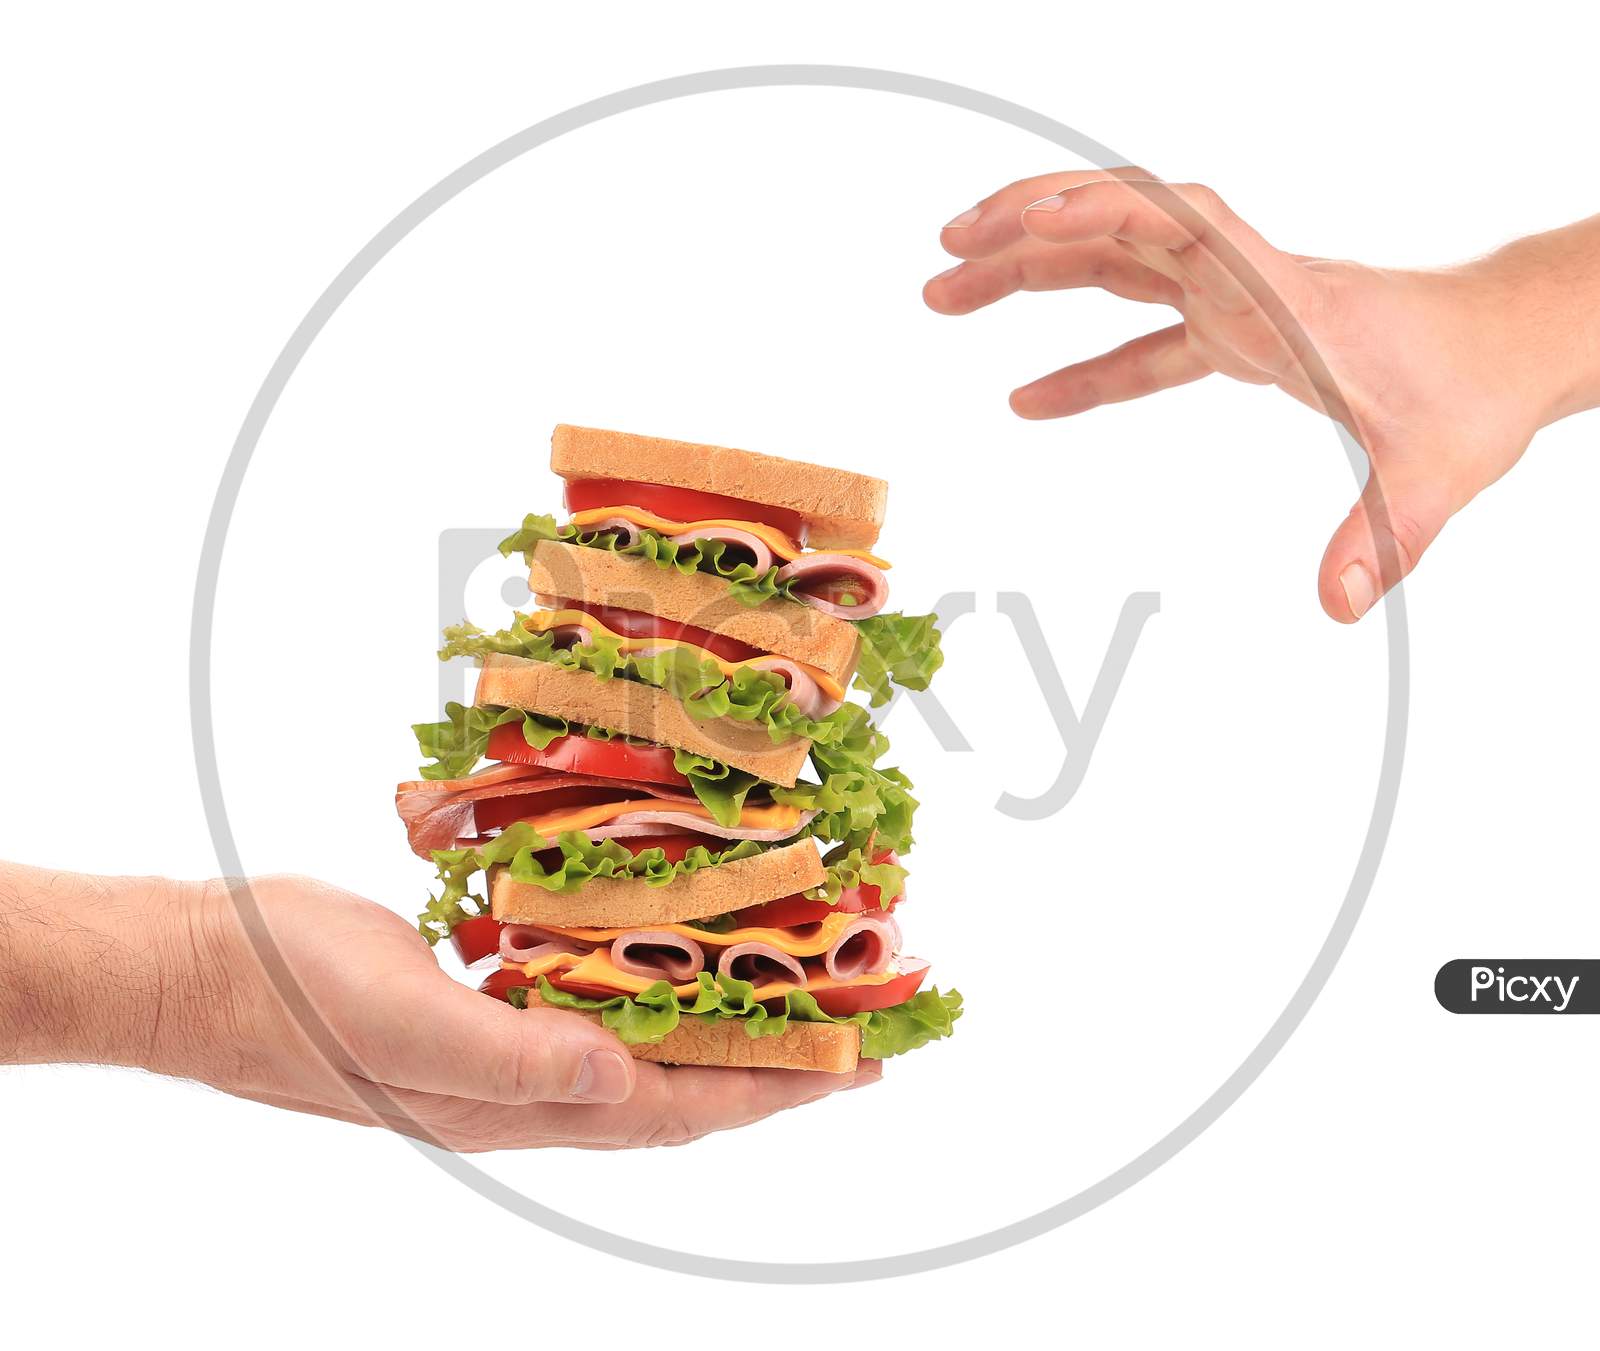 Big Fresh Sandwich In Hands. Isolated On A White Background.